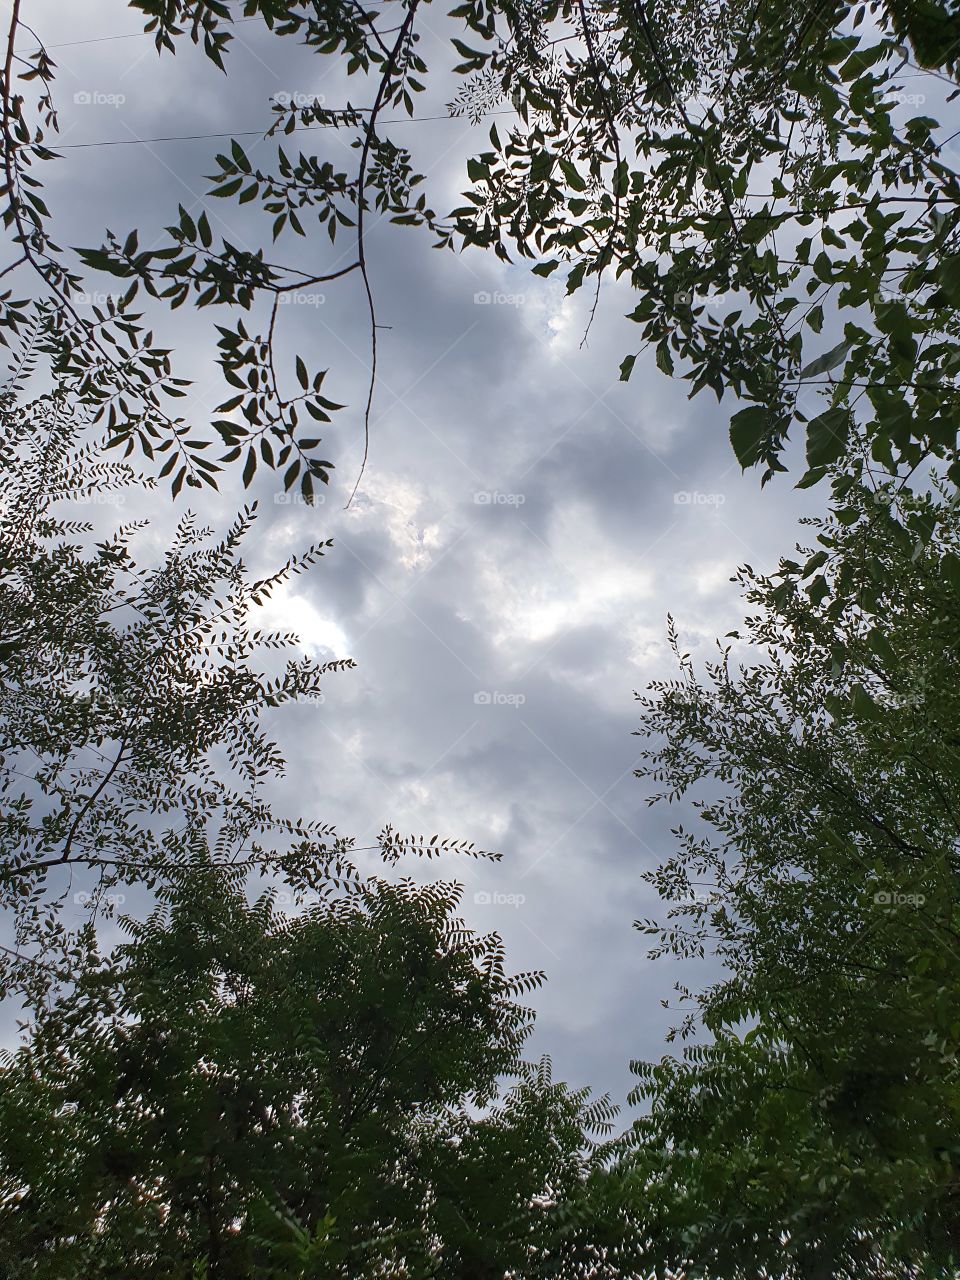 cloudy sky framed by trees